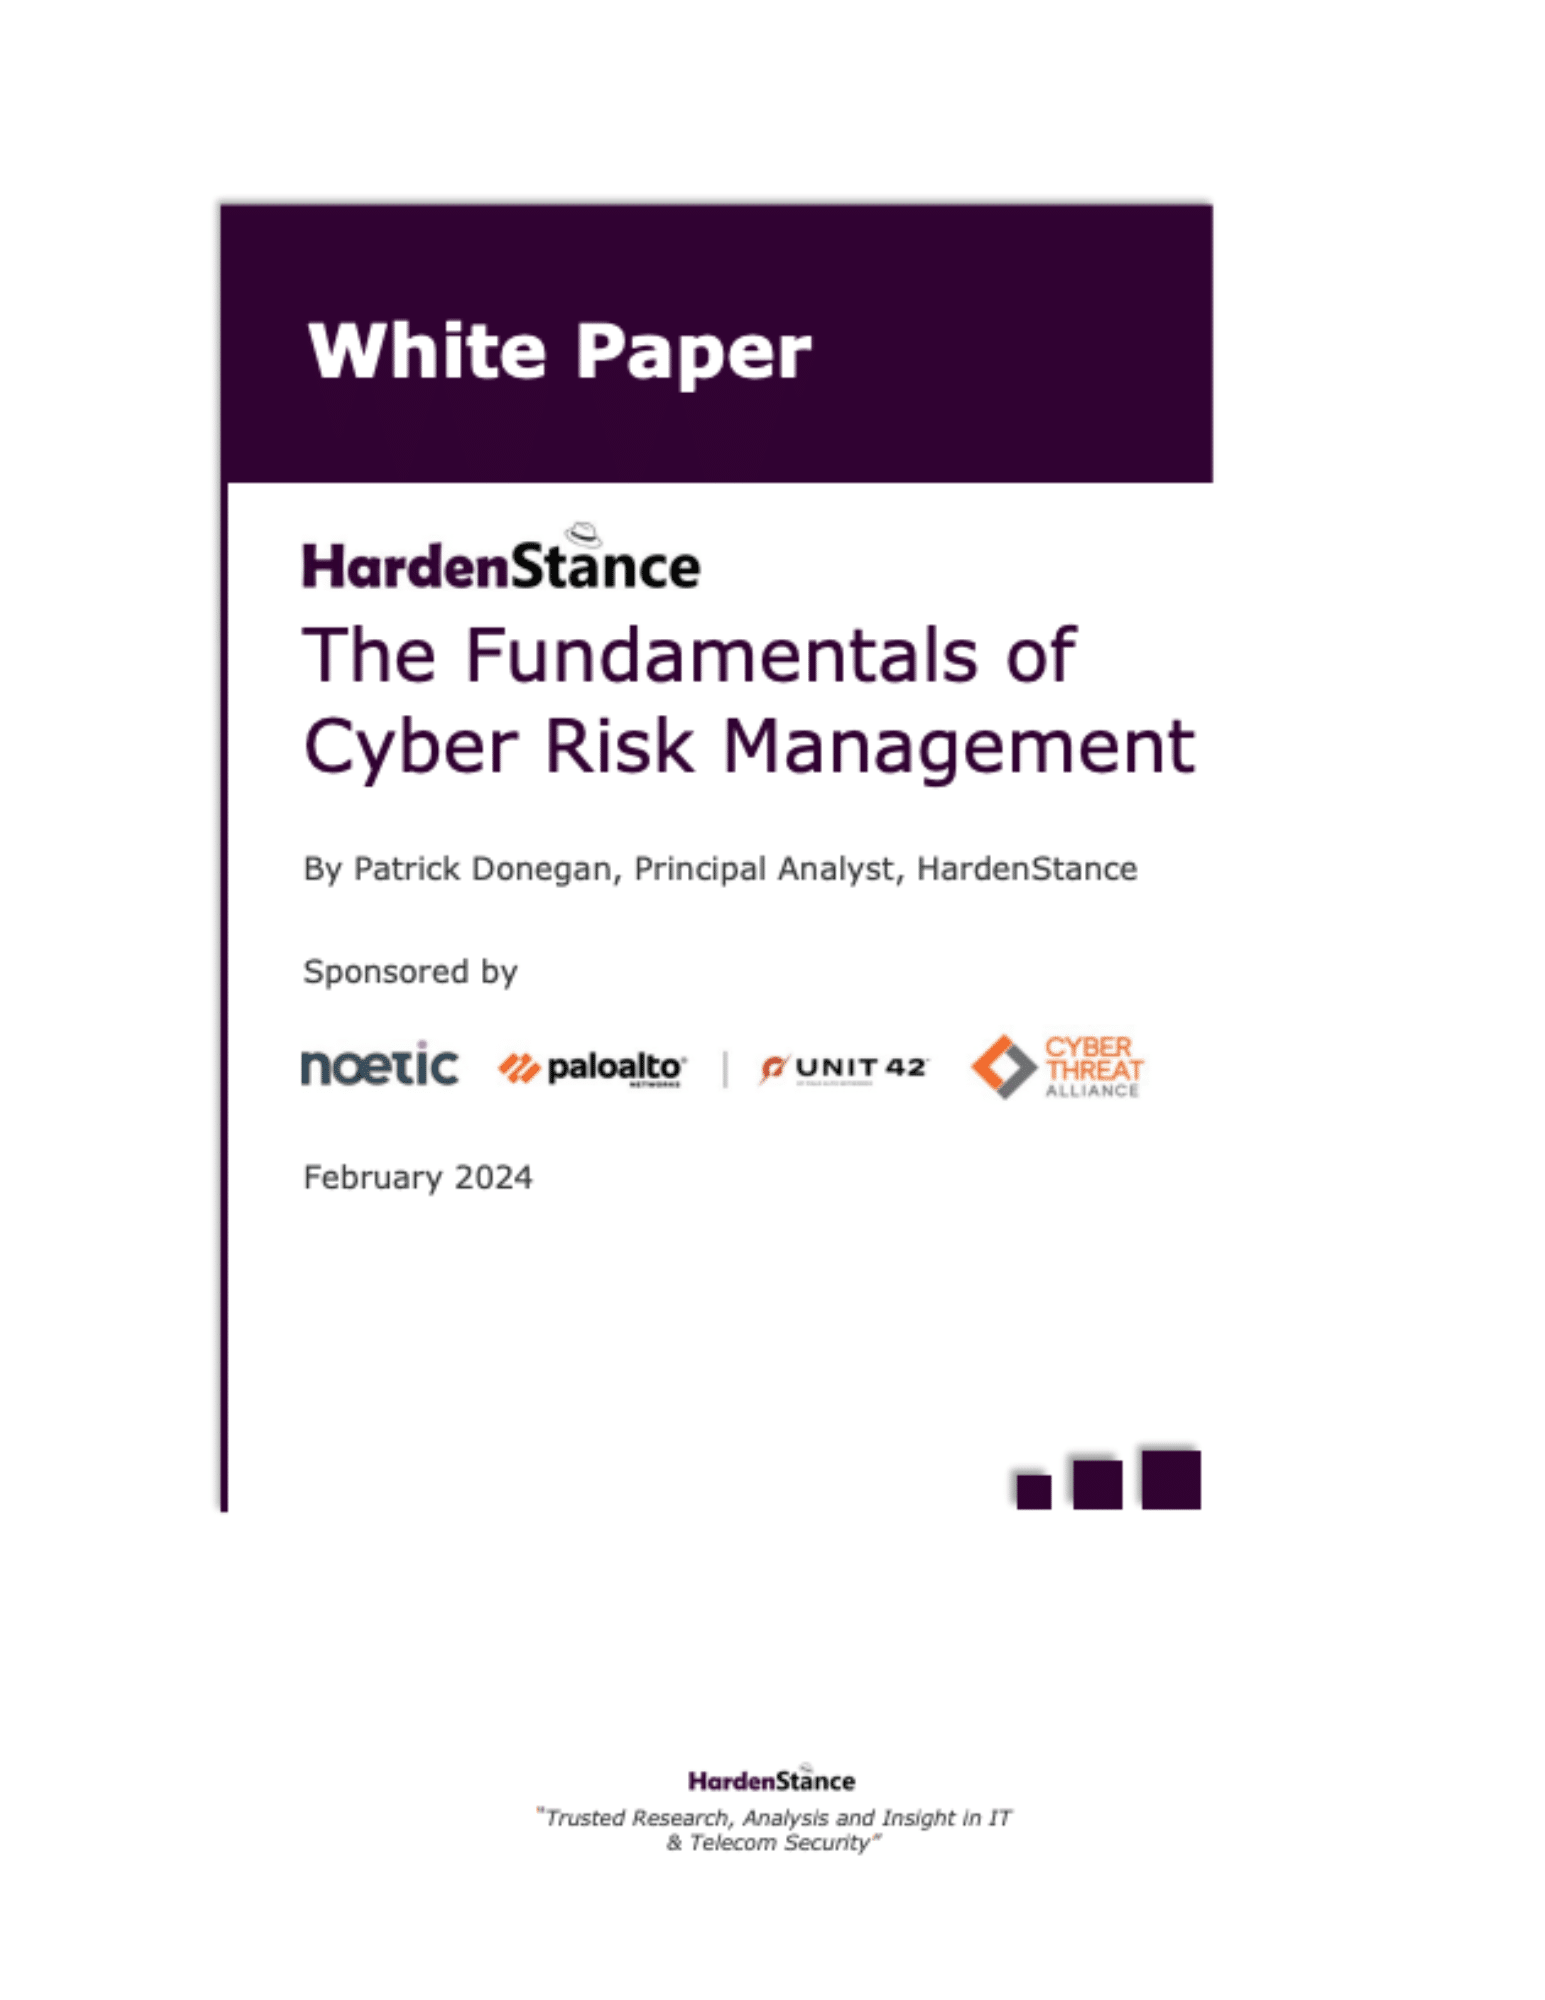 Cover of the fundamentals of cyber risk management white paper by Patrick Donegan, HardenStance